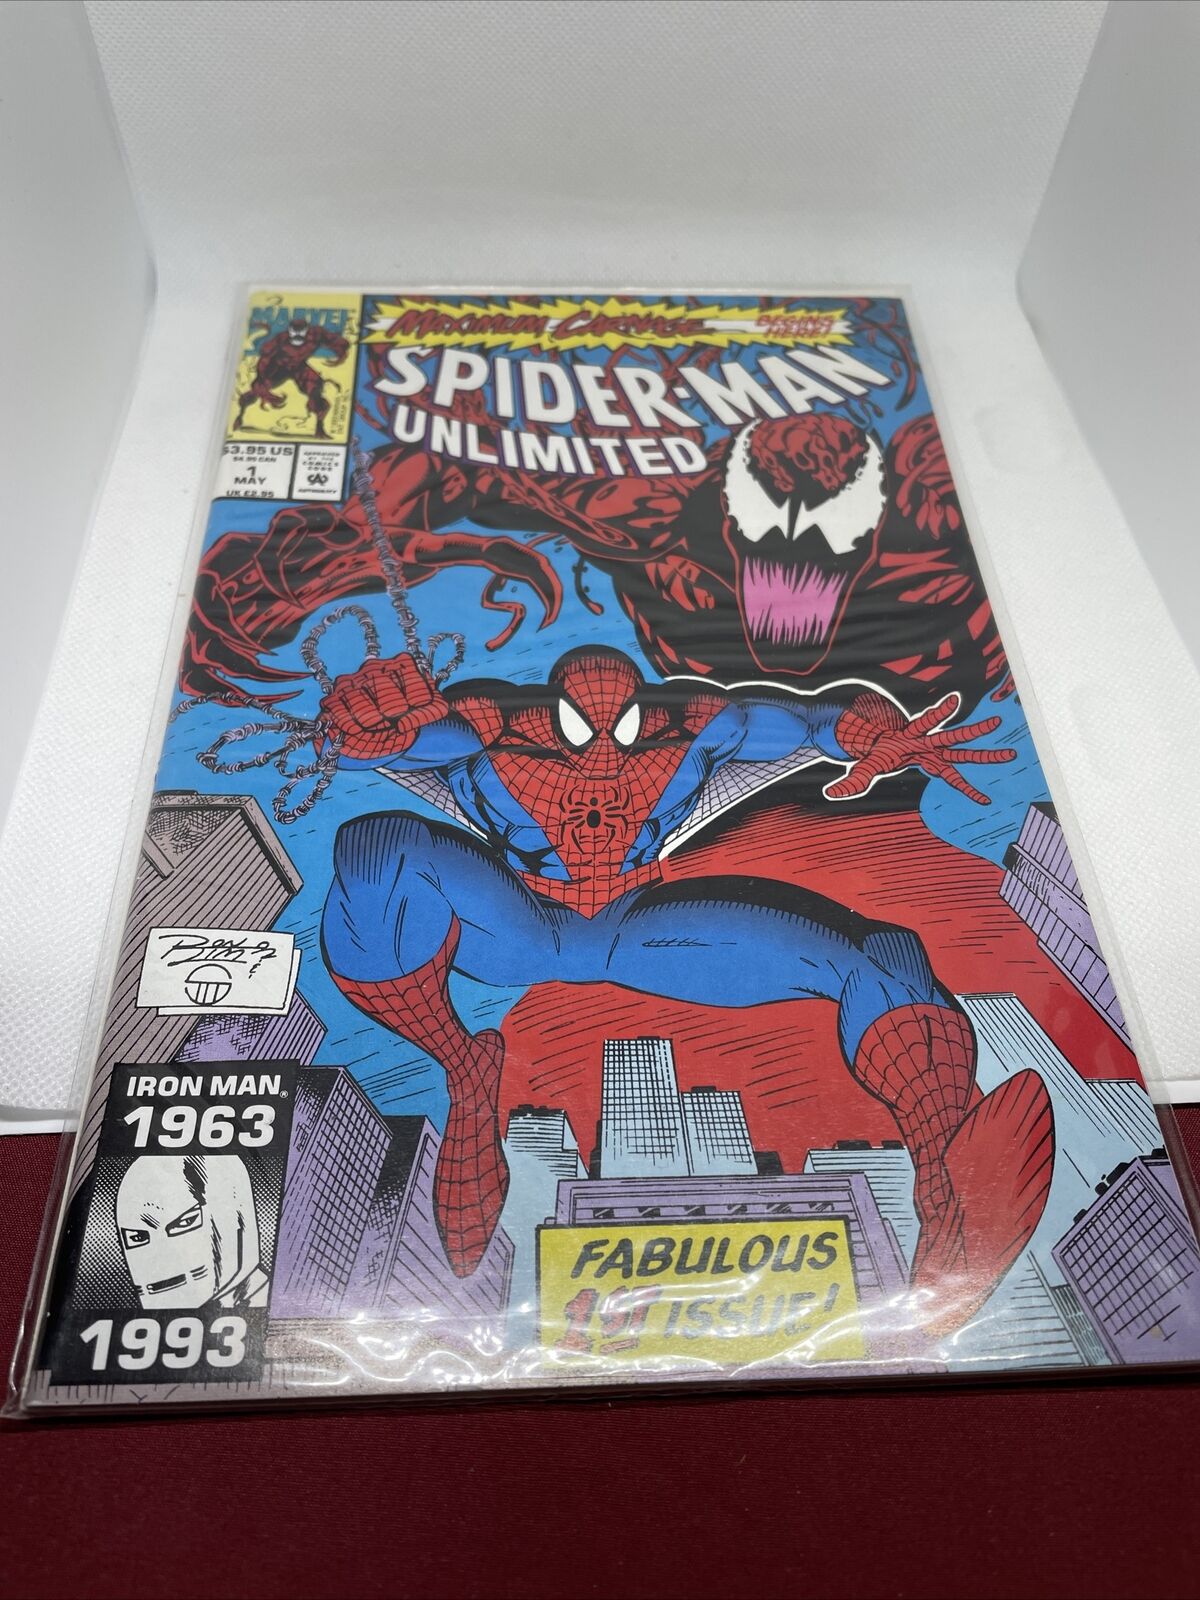 Authentic Rare Spider-Man Unlimited #1 (May 1993, Marvel) Fabulous First Issue